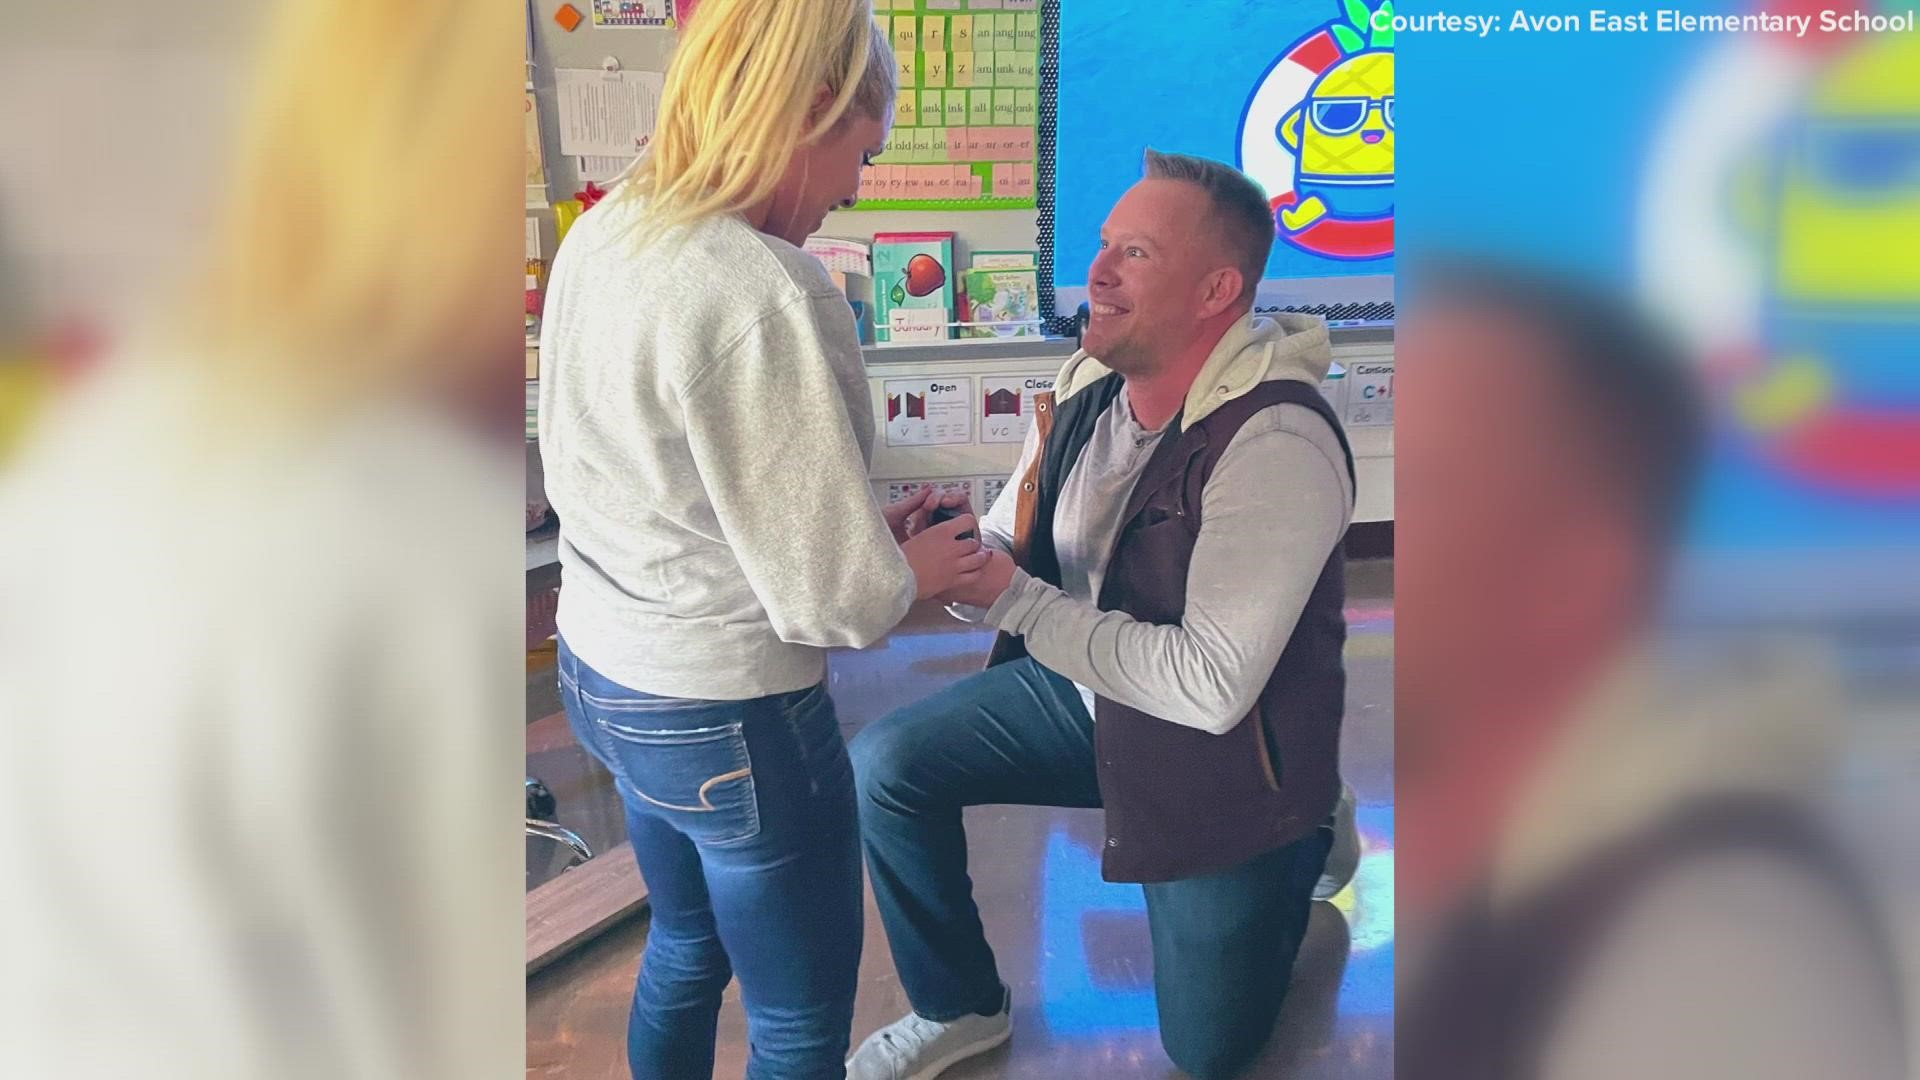 Jeans Teachr Hd Porn Videos - Boyfriend of 2nd grade teacher at Avon East Elementary School proposes in  front of students | wkyc.com